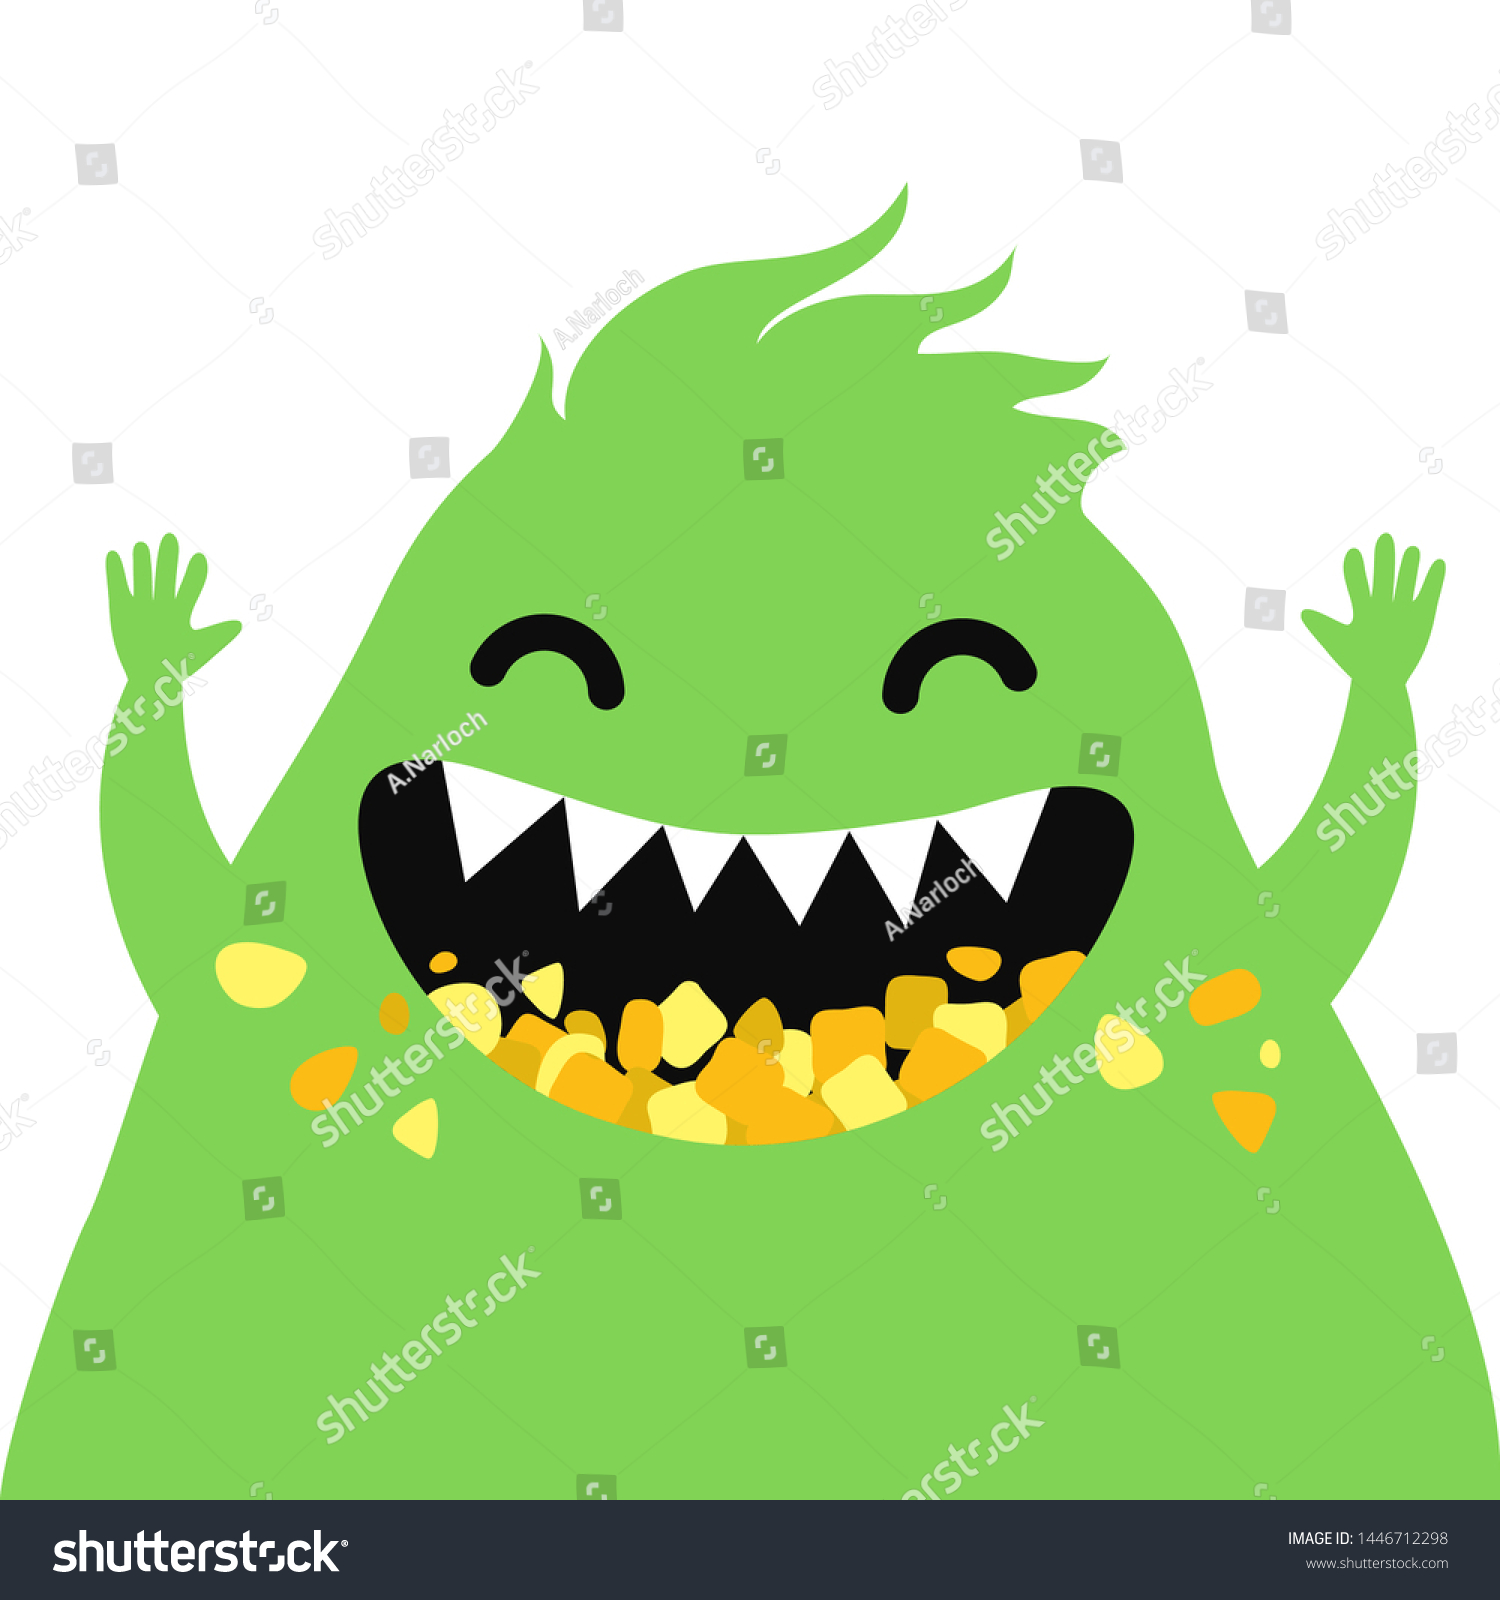 SVG of Cartoon Funny Monster. Vector Illustration For Backgrounds, Logos, Stickers, Labels, Tags And Other Design. svg